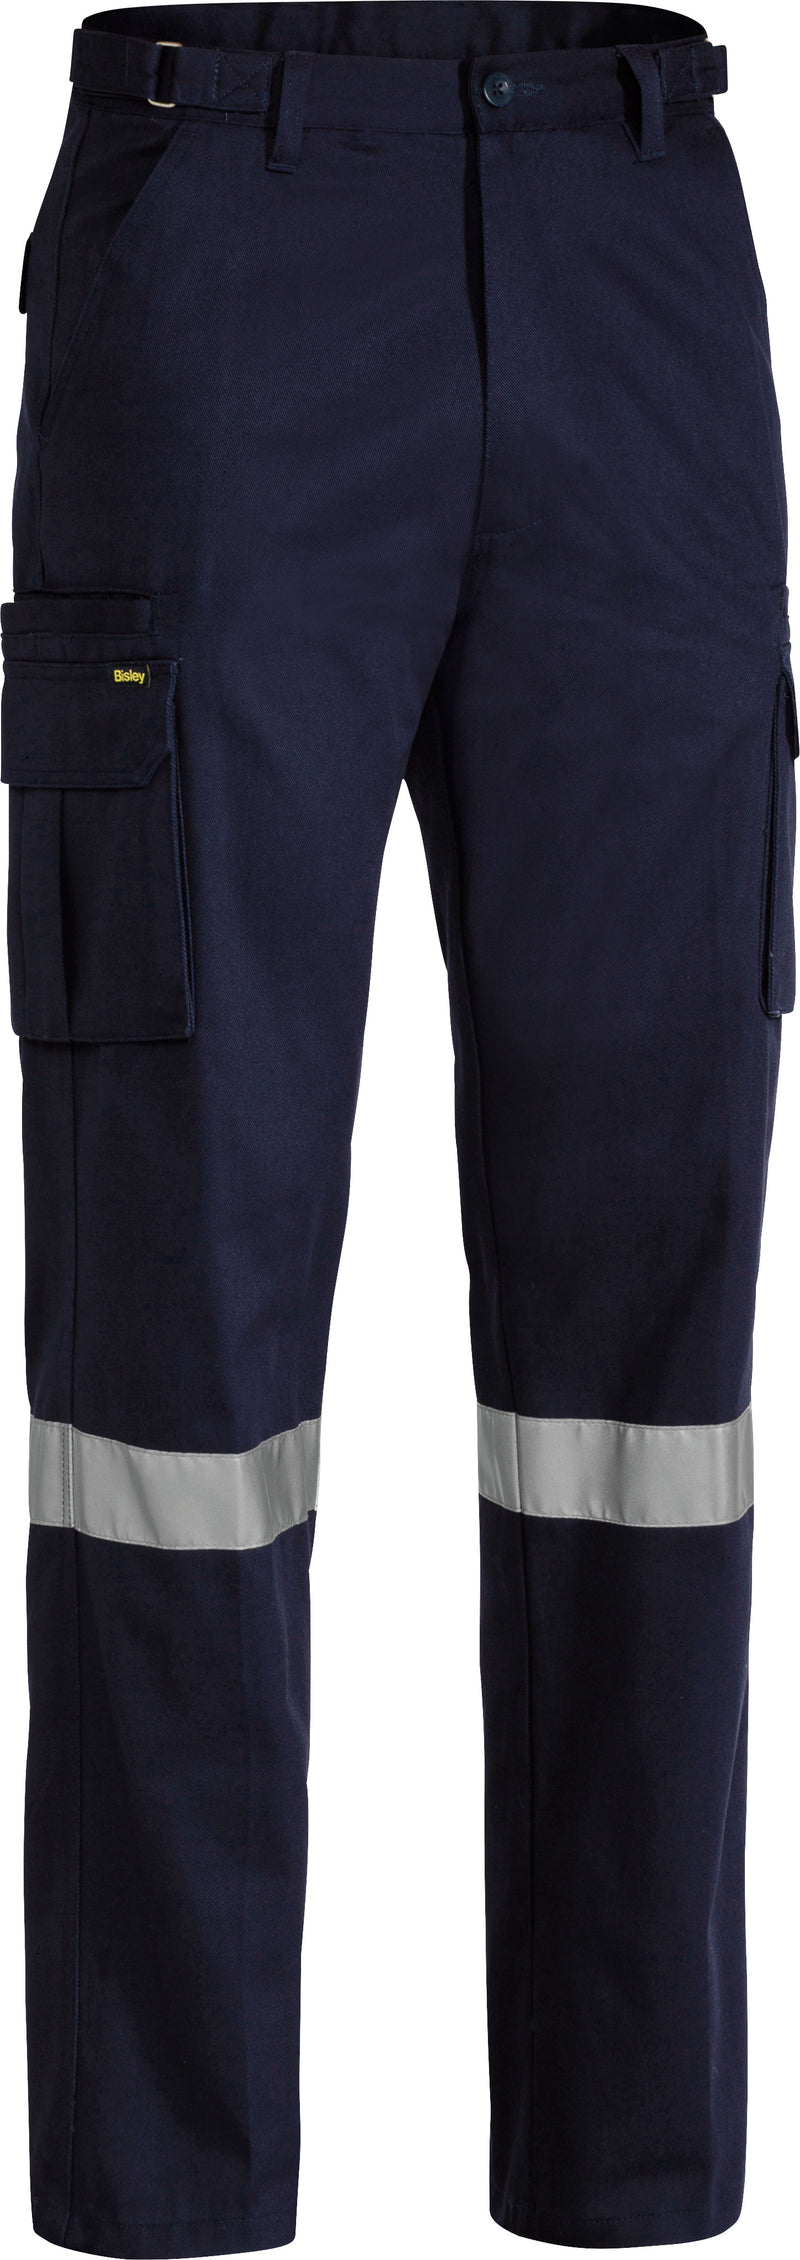 Load image into Gallery viewer, Wholesale BPC6007T Bisley 8 Pocket Cargo Pant 3M Reflective Tape - Stout Printed or Blank
